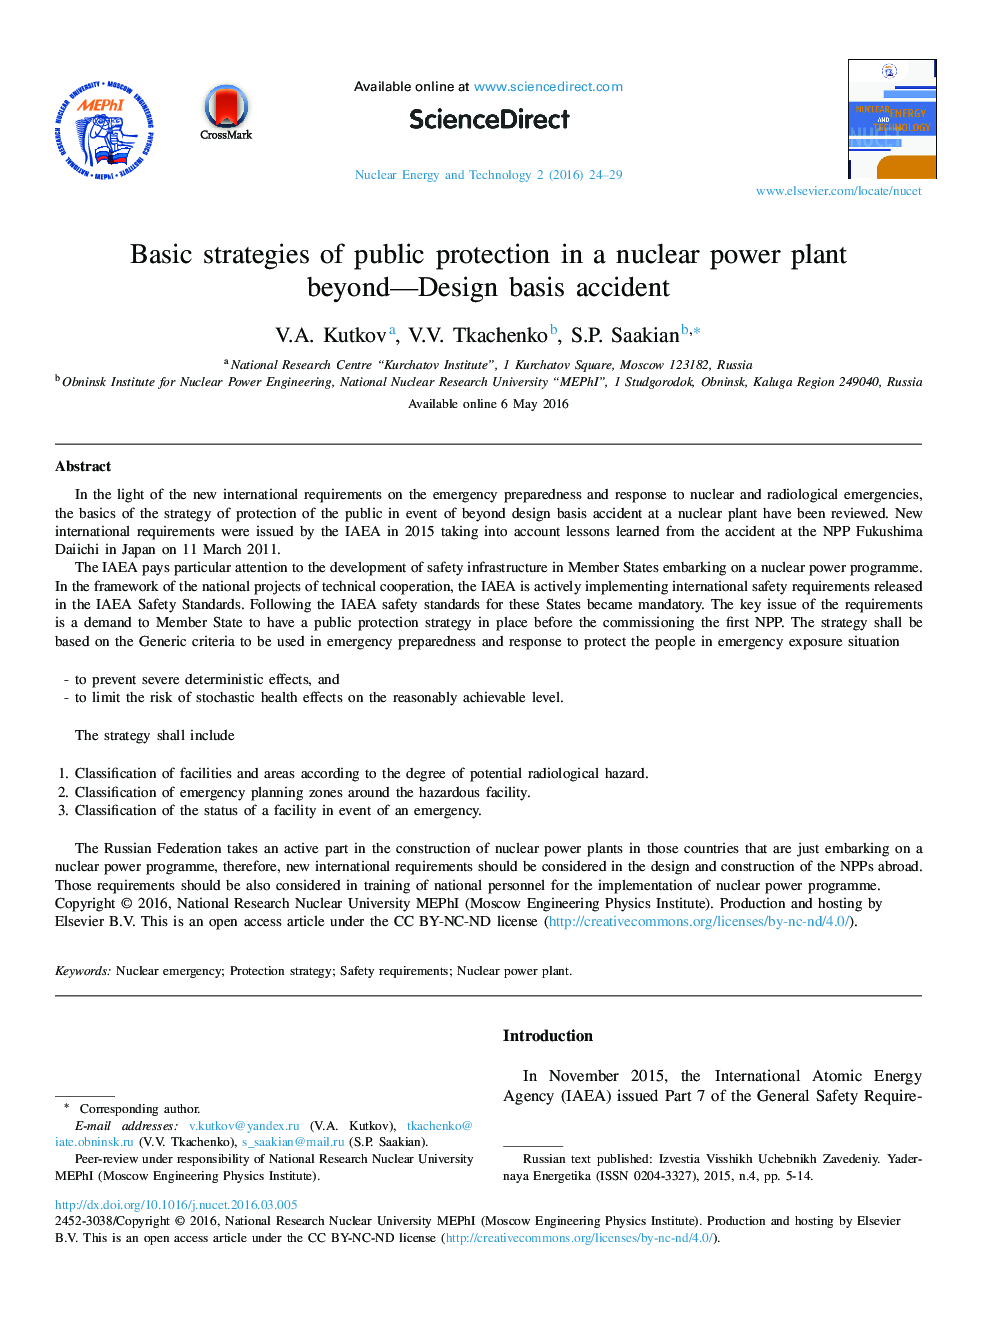 Basic strategies of public protection in a nuclear power plant beyond—Design basis accident